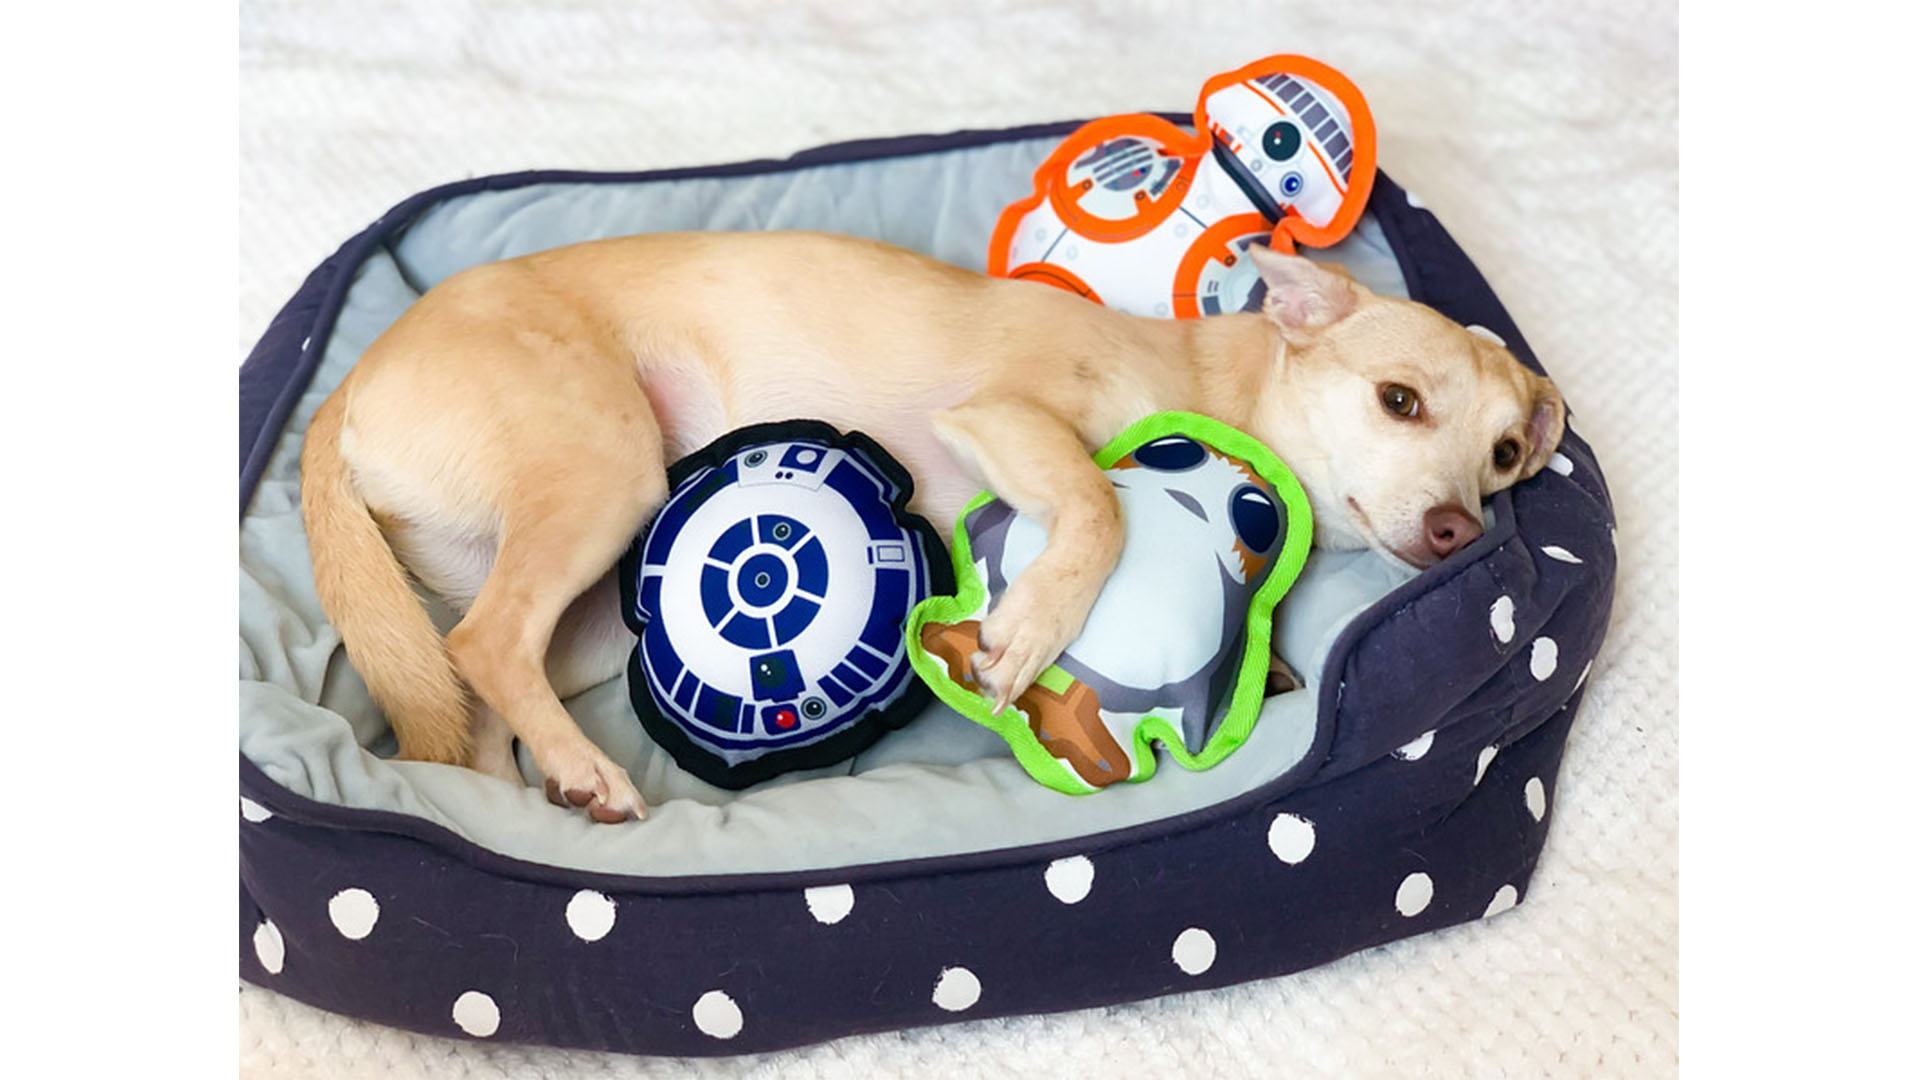 A dog cuddles in a bed with three dog toys, including a stuffed BB-8 and Porg from Star Wars: The Force Awakens.